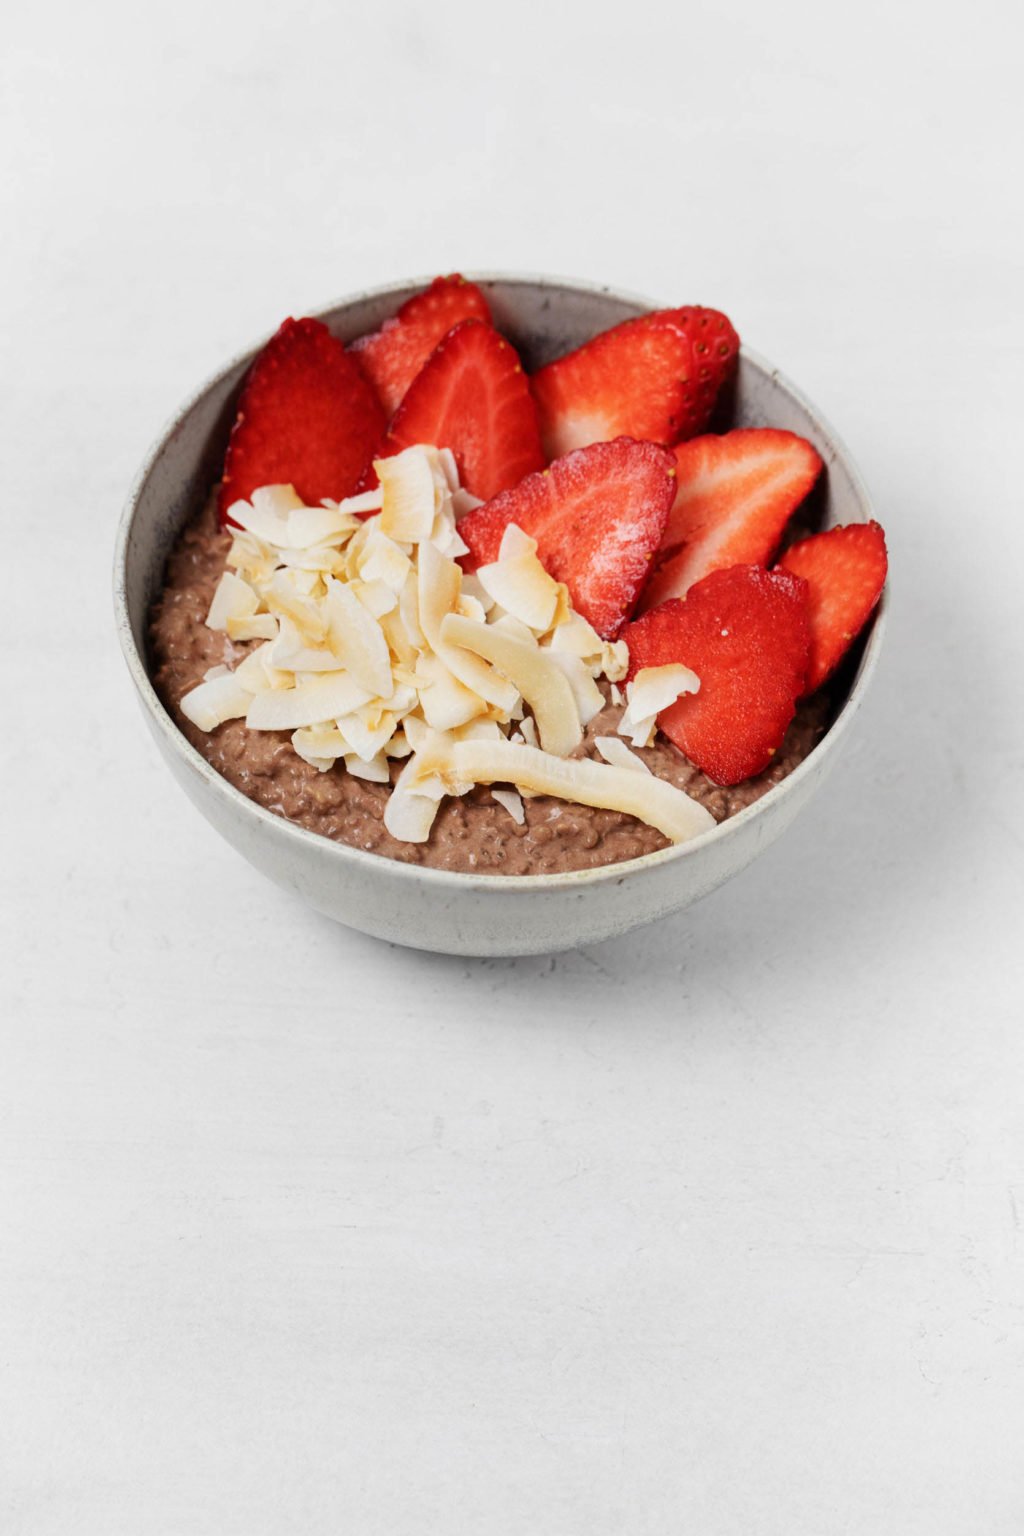 A quinoa breakfast bowl is served in a gray, ceramic bowl. It's topped with bright red, sliced strawberries.